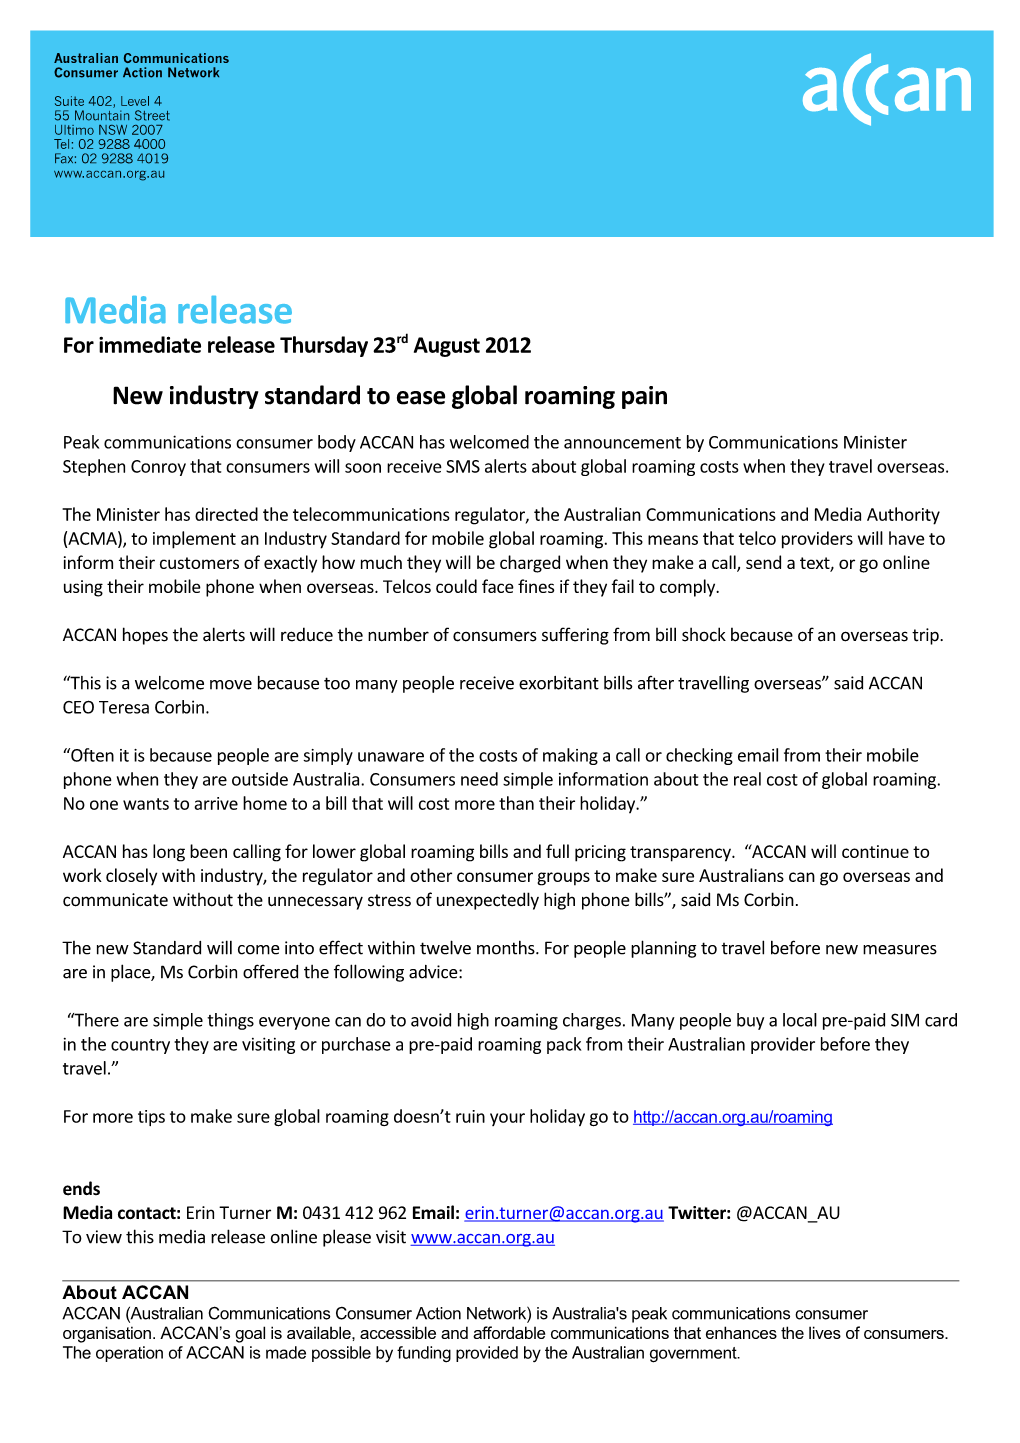 For Immediate Release Thursday23rd August 2012New Industry Standard to Ease Global Roaming Pain